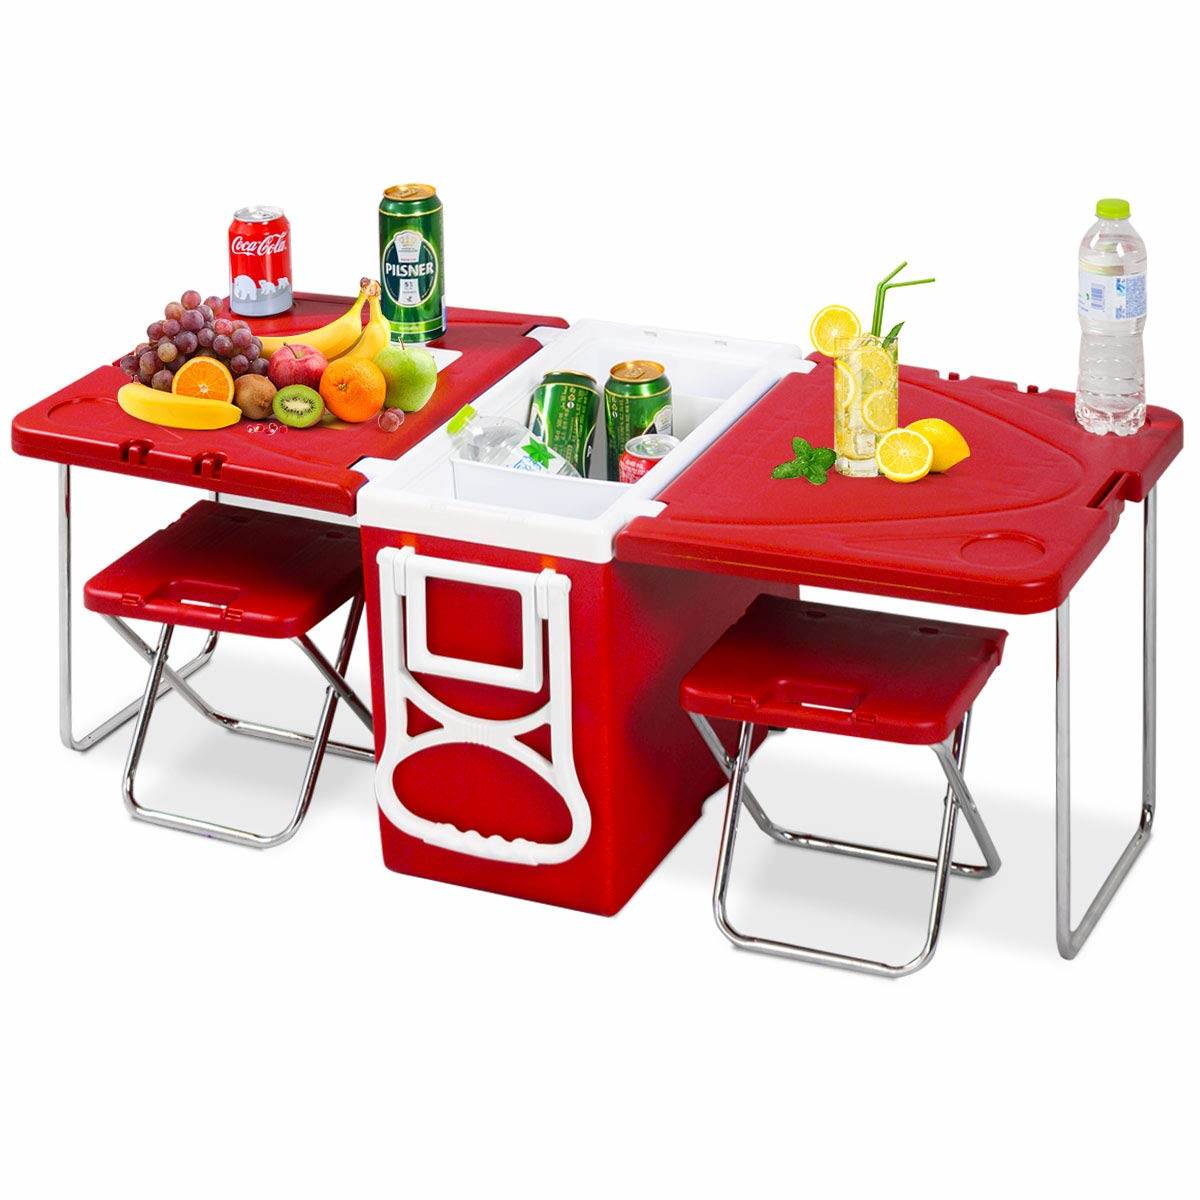 Mini Picnic Table with Cooler